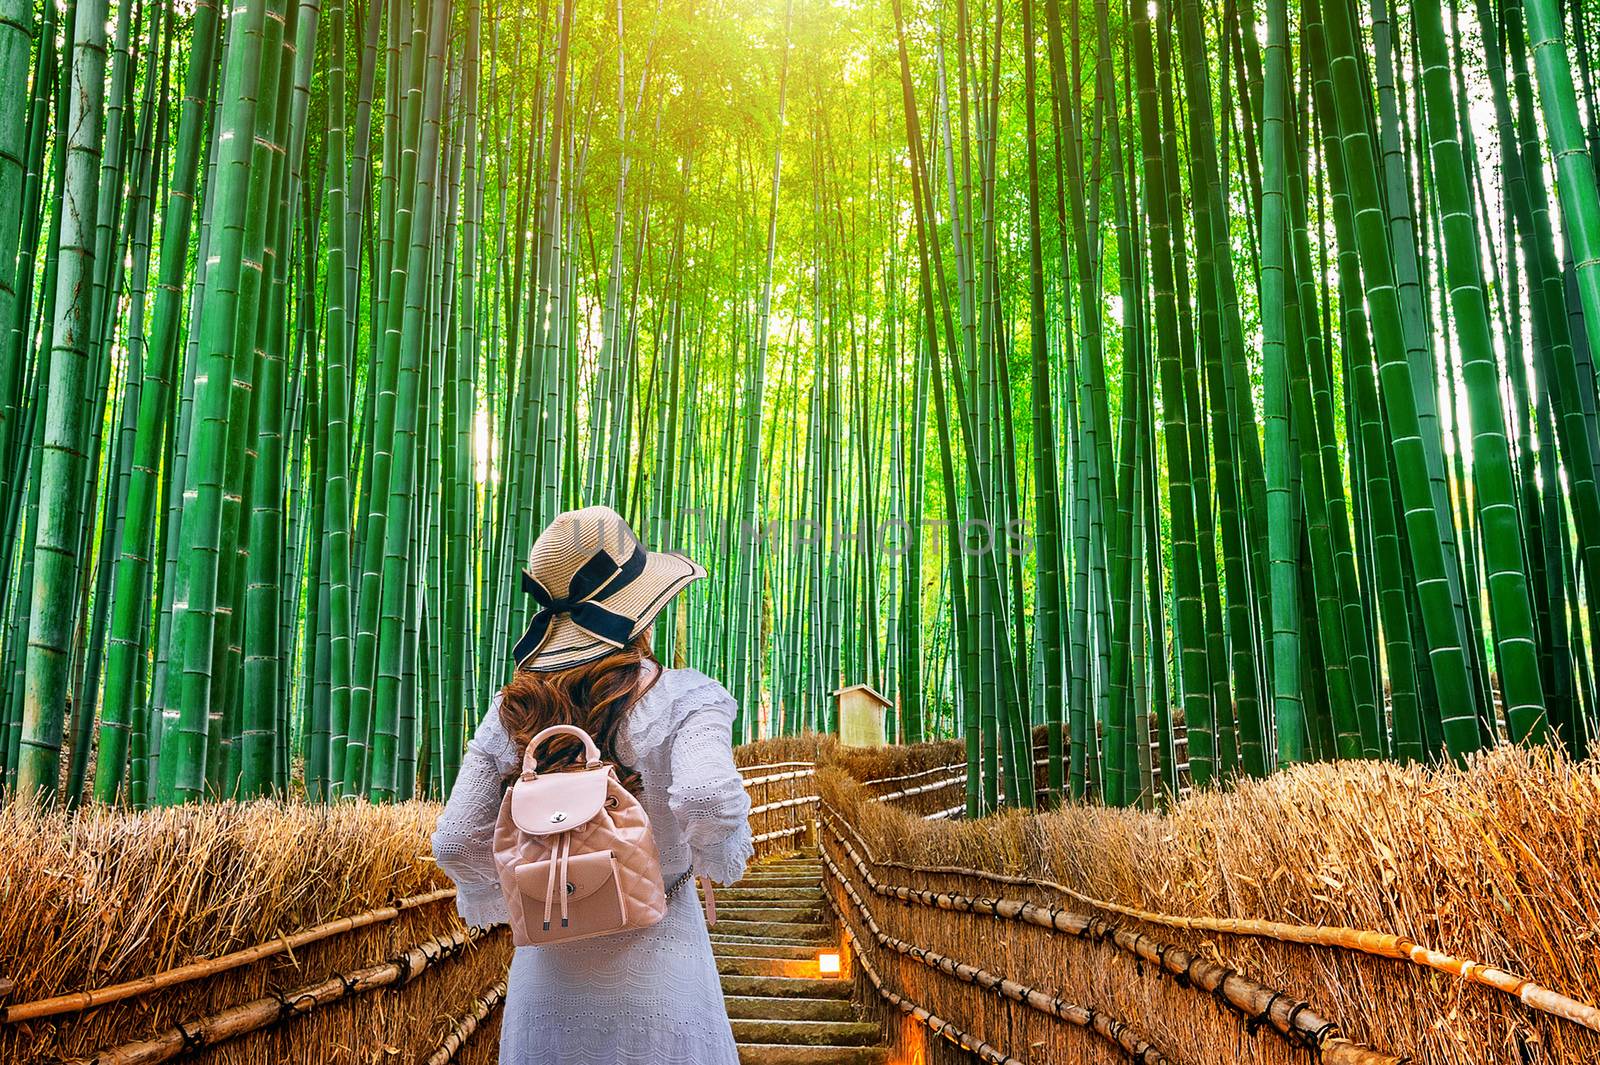 Woman walking at Bamboo Forest in Kyoto, Japan. by gutarphotoghaphy